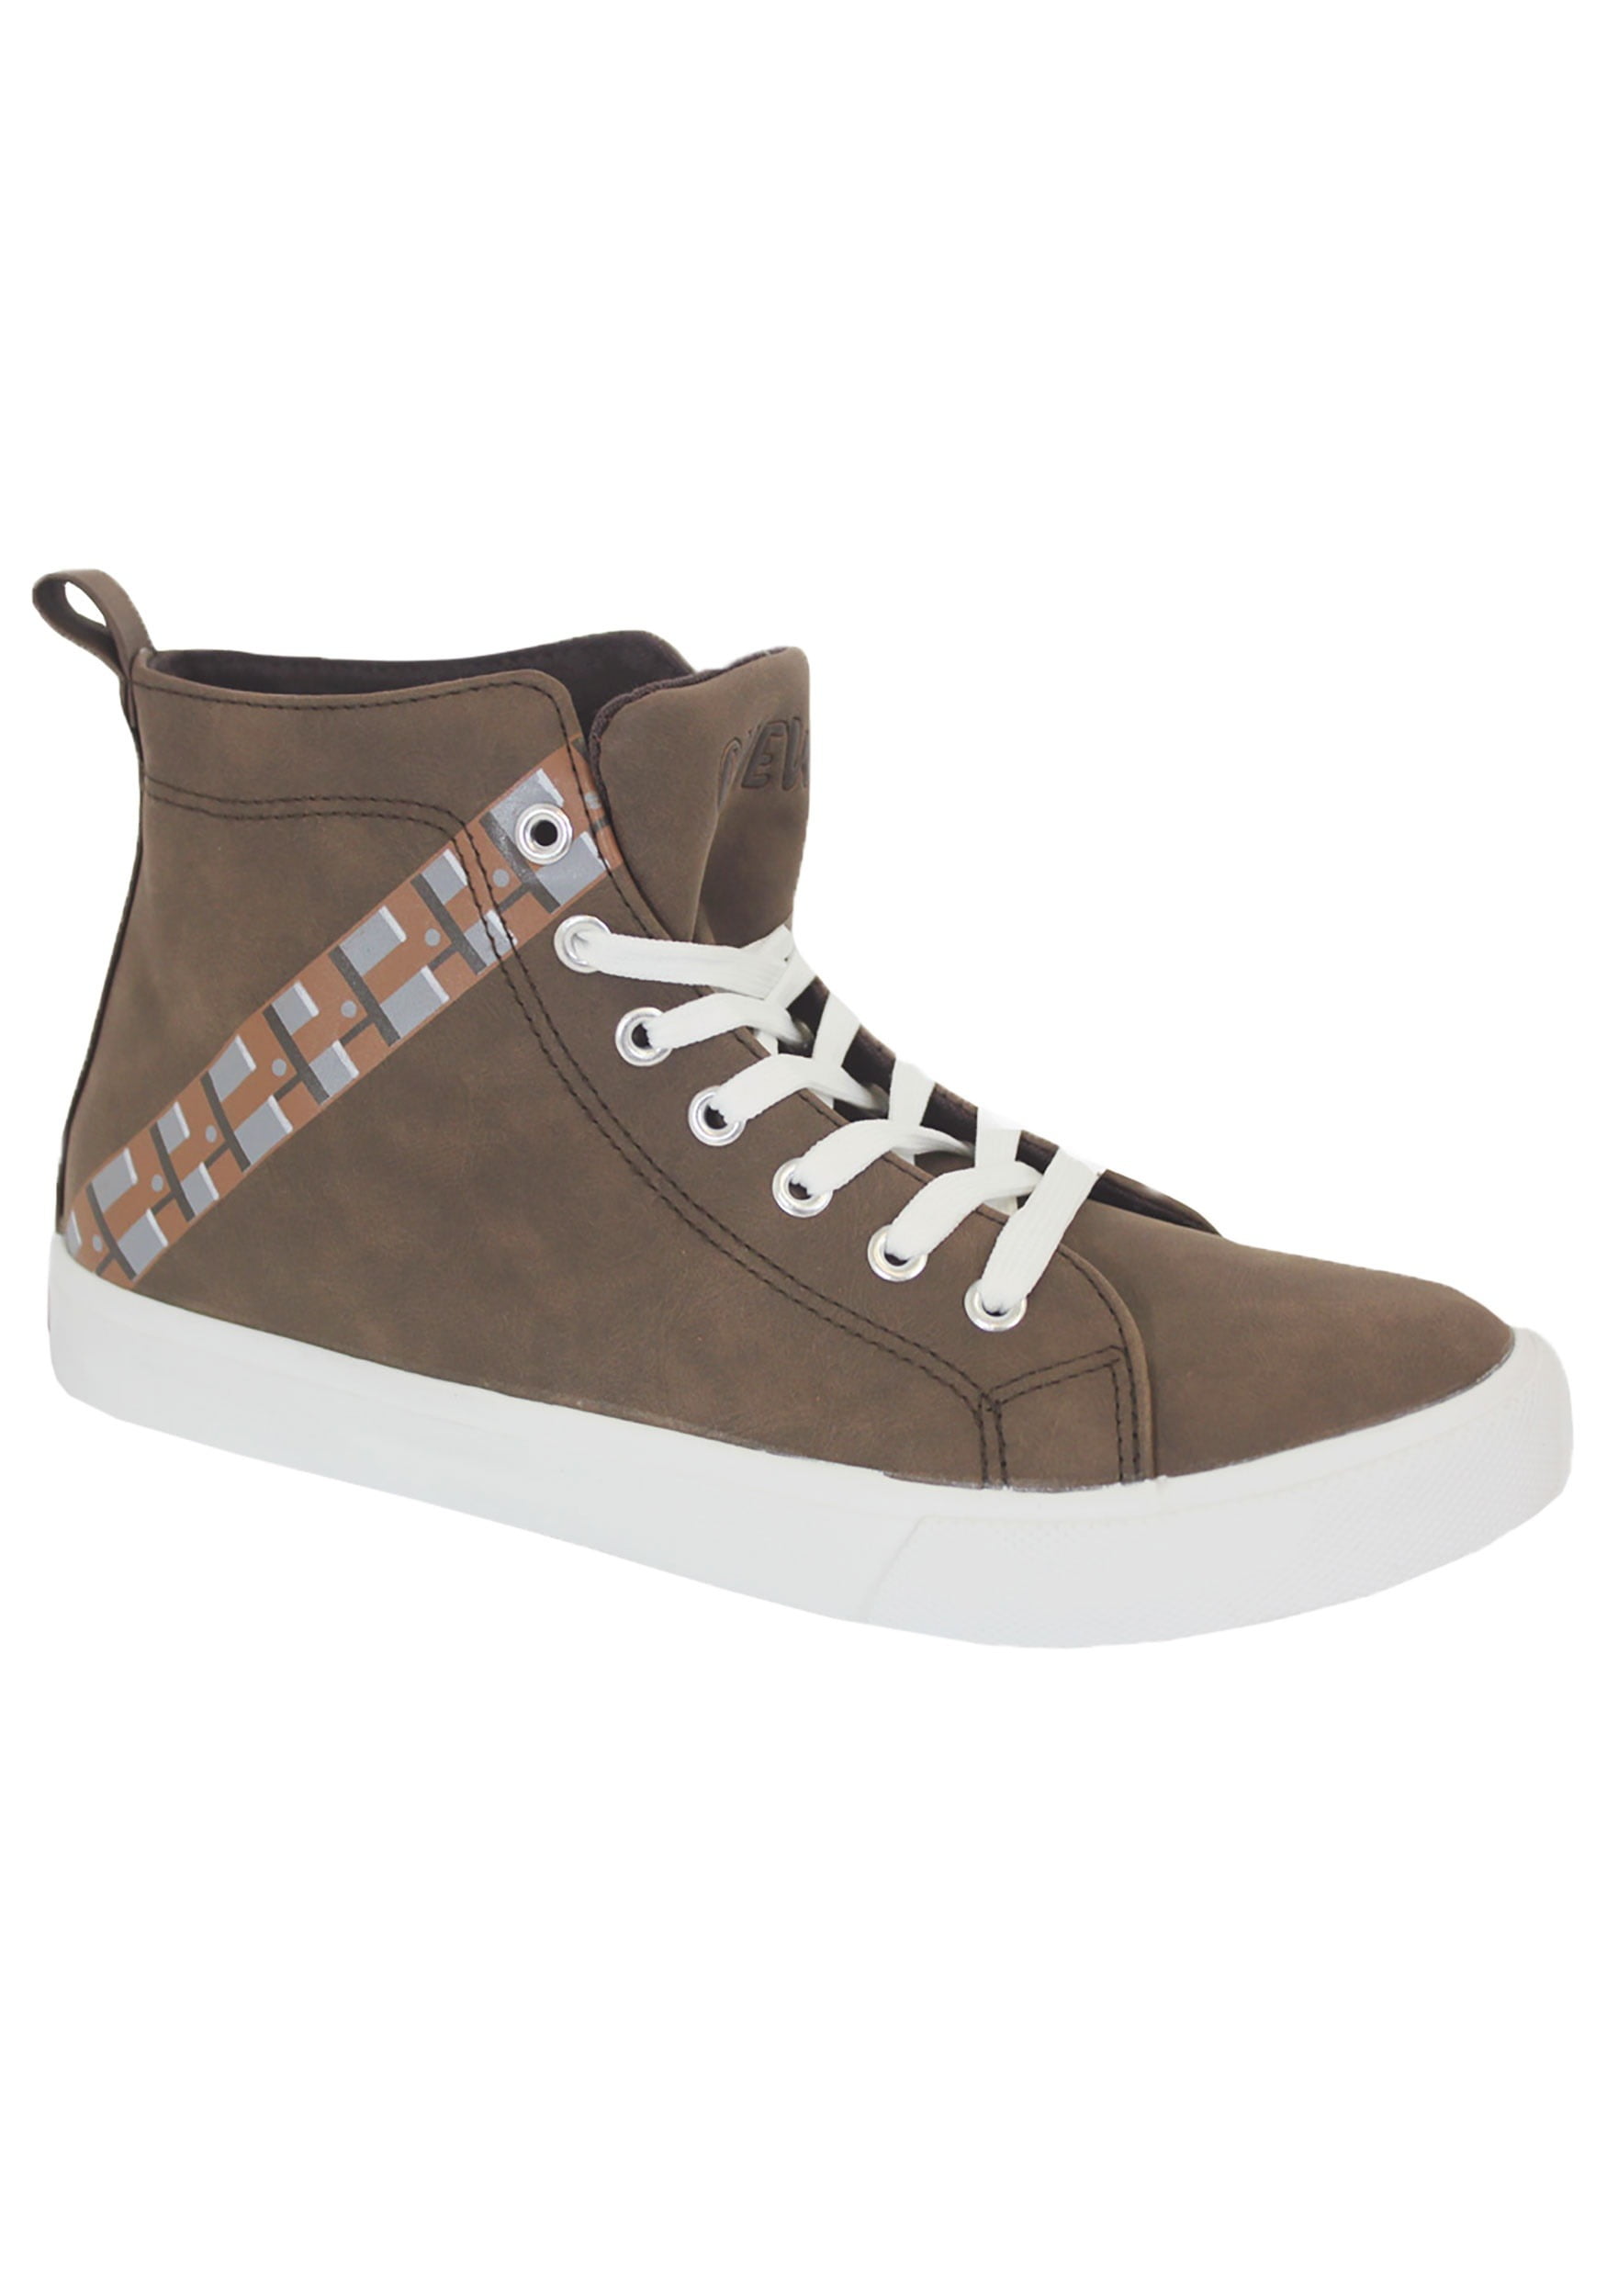 Ground Up Star Wars Chewbacca Mens High Top Sneakers